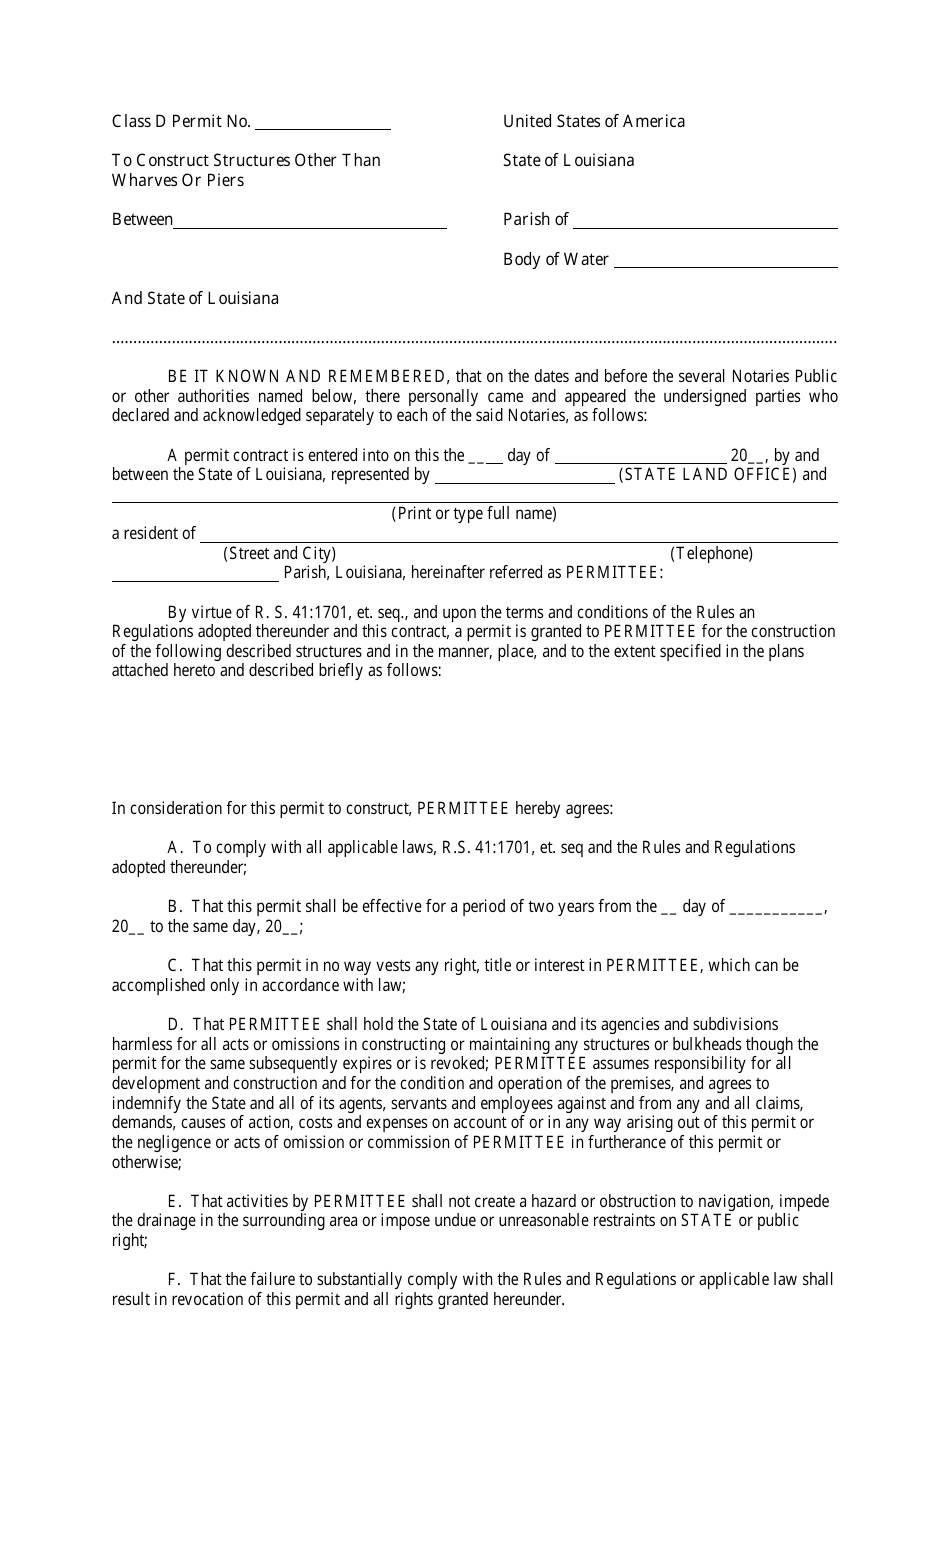 Class D Permit to Construct Structures Other Than Wharves or Piers - Louisiana, Page 1